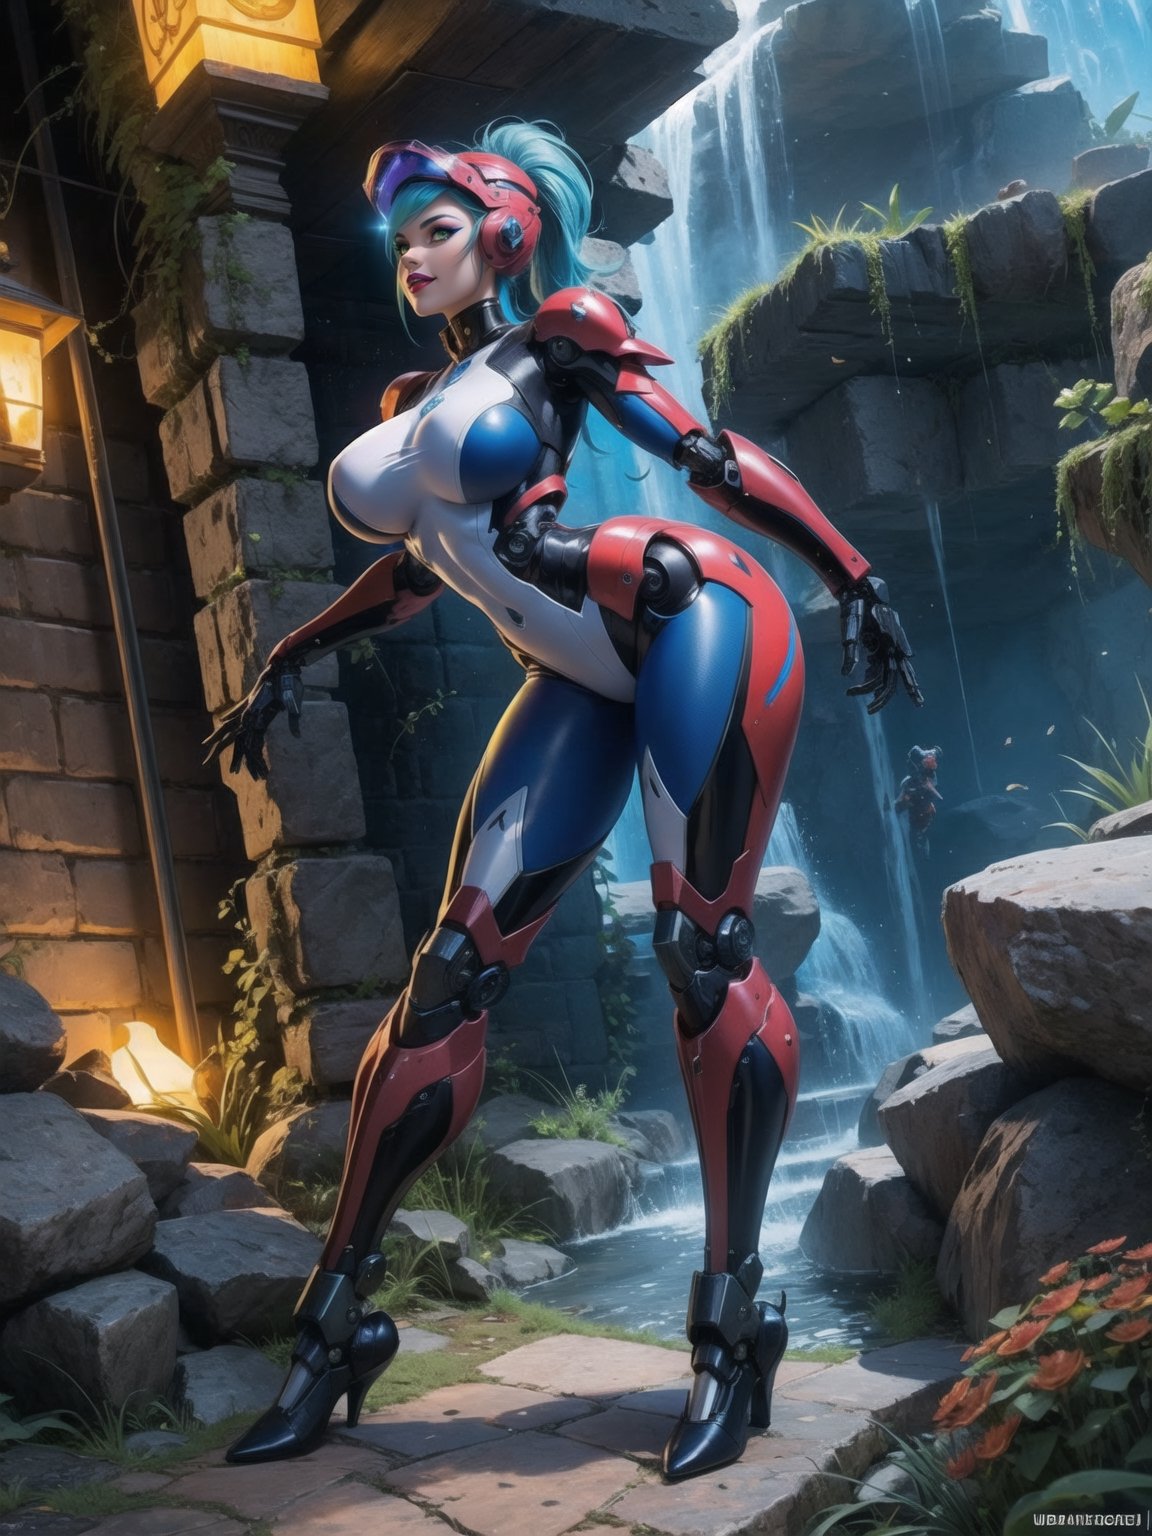 Solo female, ((wearing mecha suit+robotic suit completely white, with blue parts, more yellow lights, suit with attached weapons, gigantic breasts, wearing cybernetic helmet with visor)), mohawk hair, blue hair, messy hair, hair with ponytail, looking directly at the viewer, she is, in a dungeon, with a waterfall, large stone altars, stone structures, machines, robots, large altars of ancient gods, figurines, Super Metroid, ultra technological, Zelda, Final Fantasy, worldofwarcraft, UHD, best possible quality, ultra detailed, best possible resolution, Unreal Engine 5, professional photography, she is (((sensual pose with interaction and leaning on anything+object+on something+leaning against))), better_hands, (full body), More detail